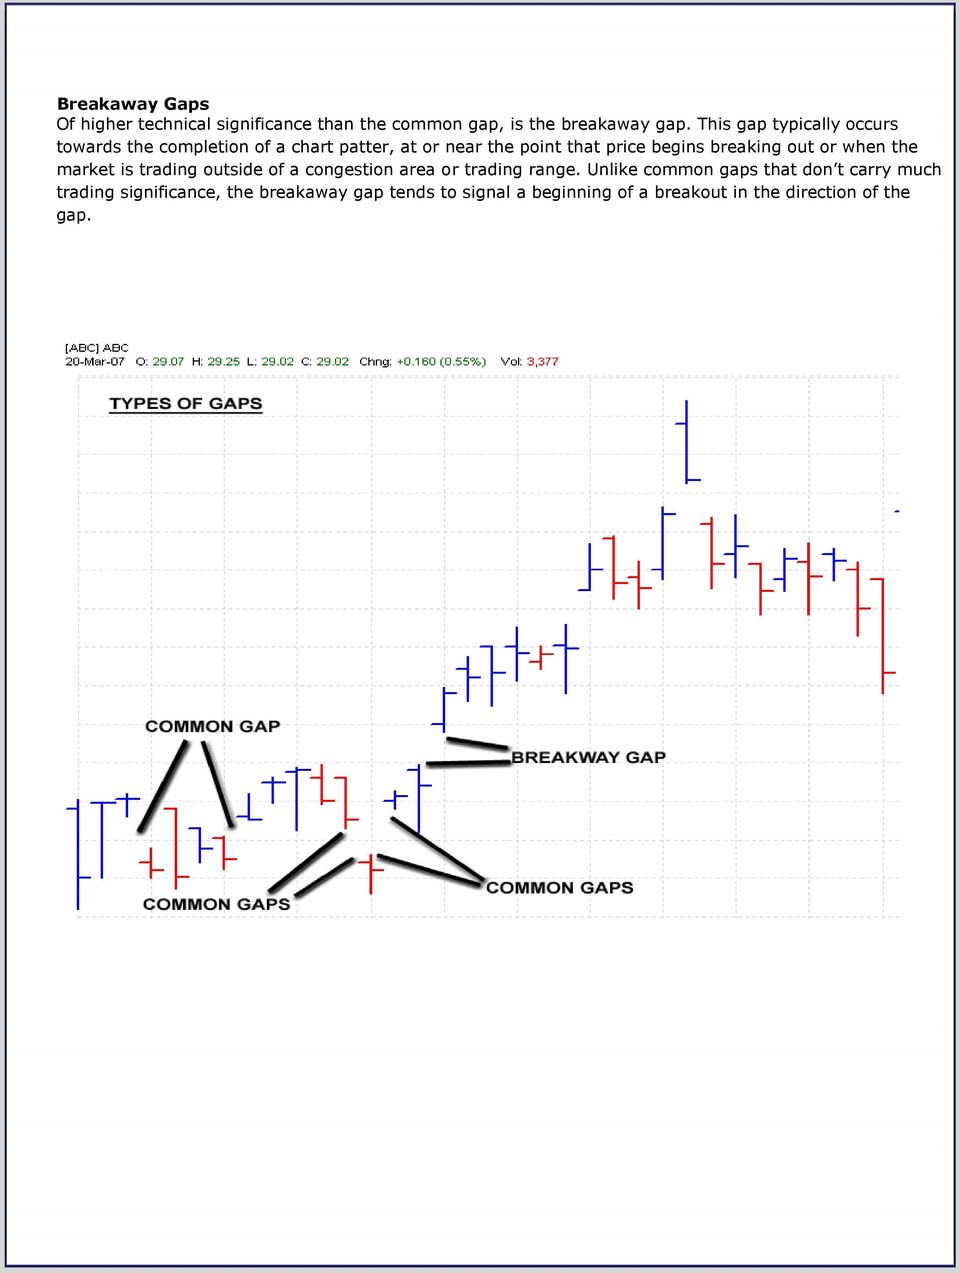 breaking out or when the market is trading outside of a congestion area or trading range.